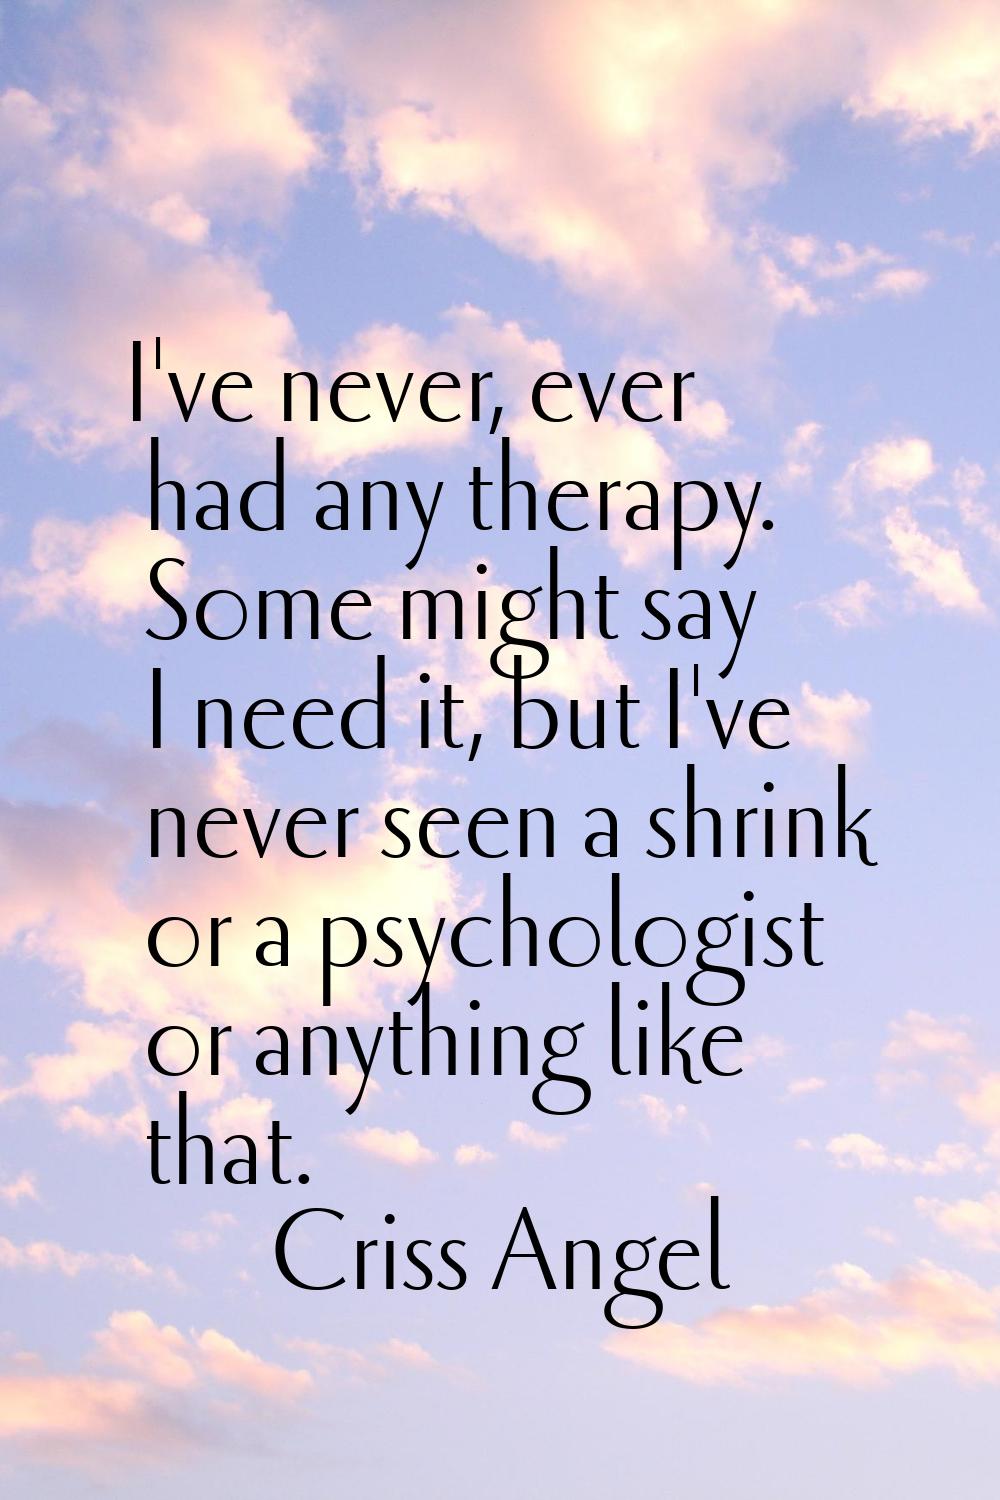 I've never, ever had any therapy. Some might say I need it, but I've never seen a shrink or a psych